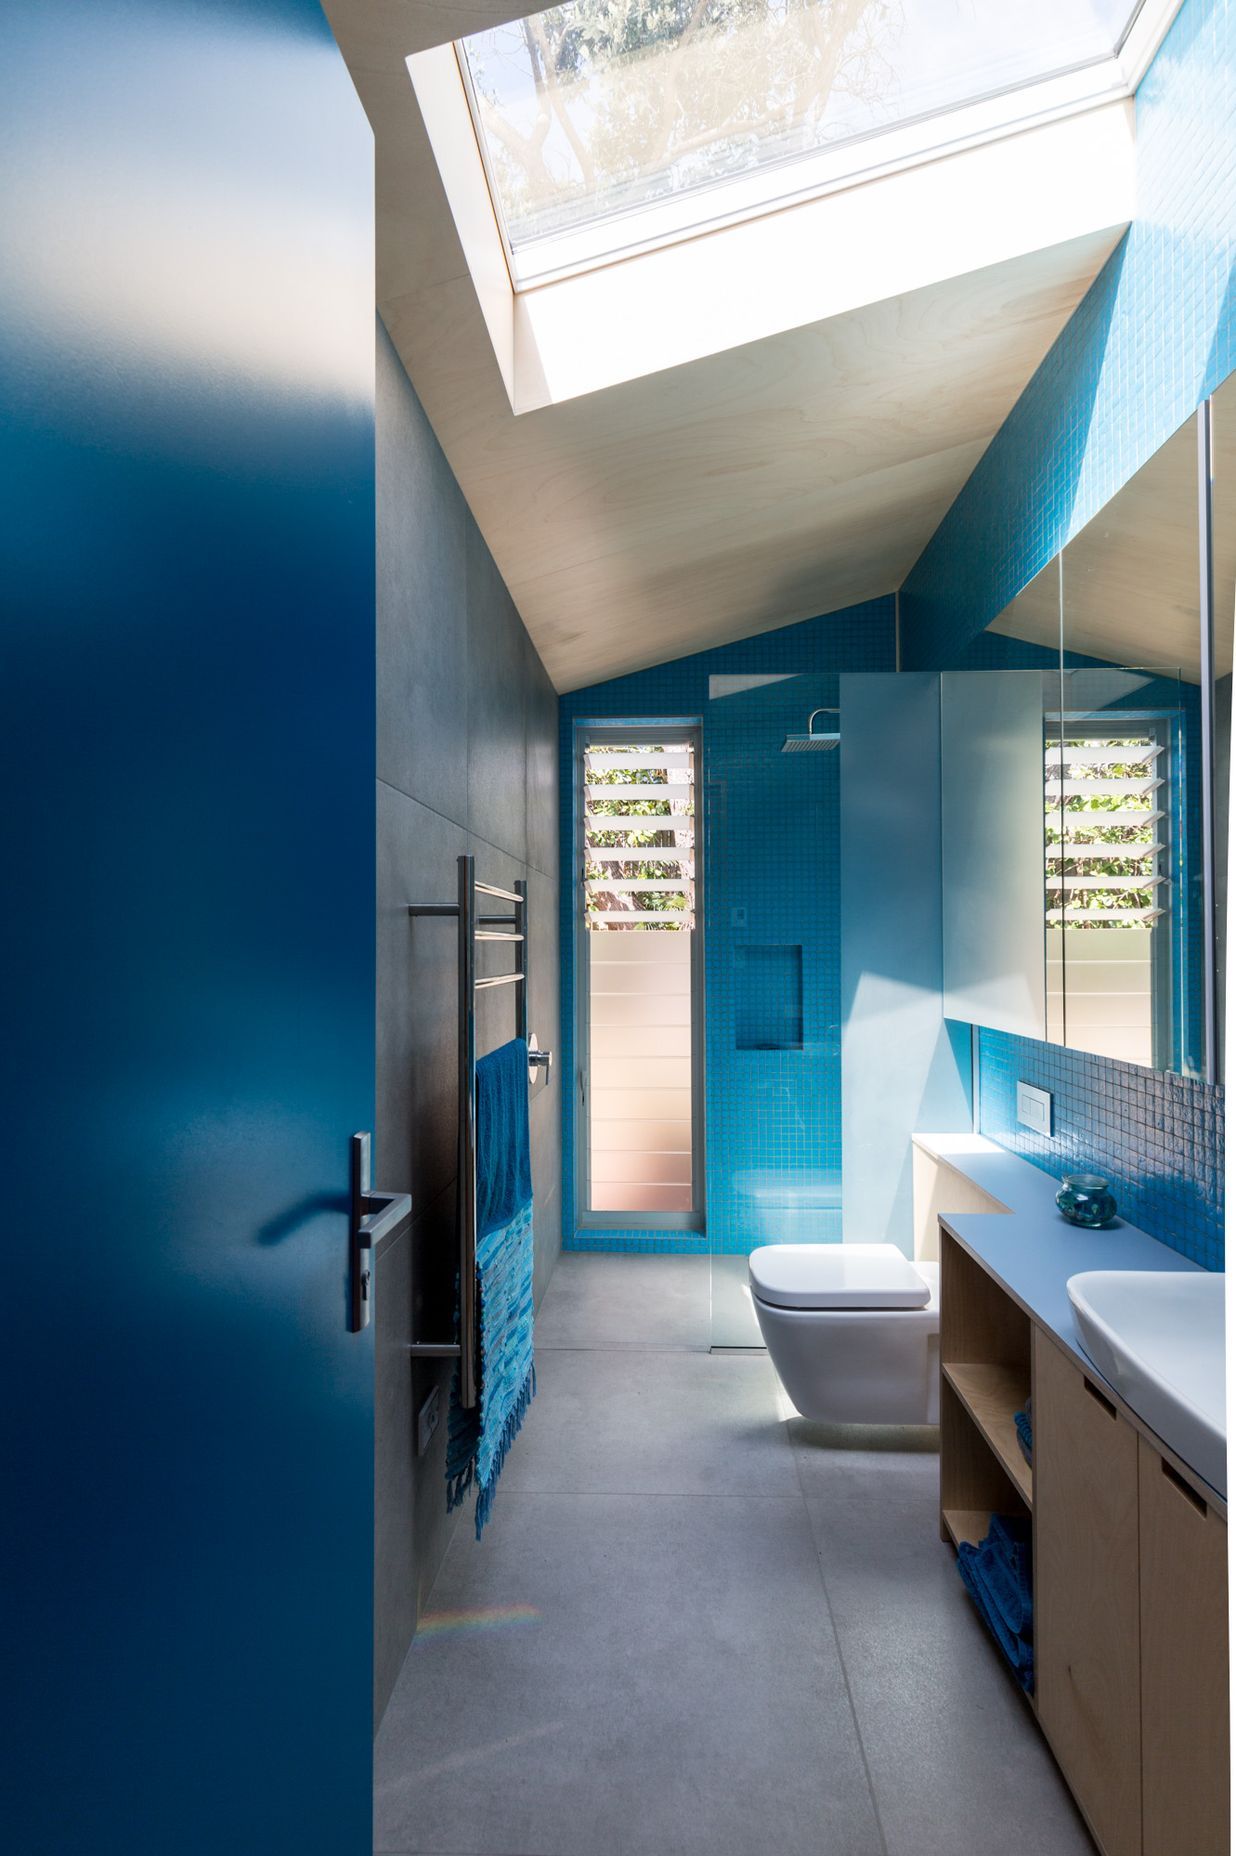 A large skylight admits natural light into the azure-coloured bathroom.